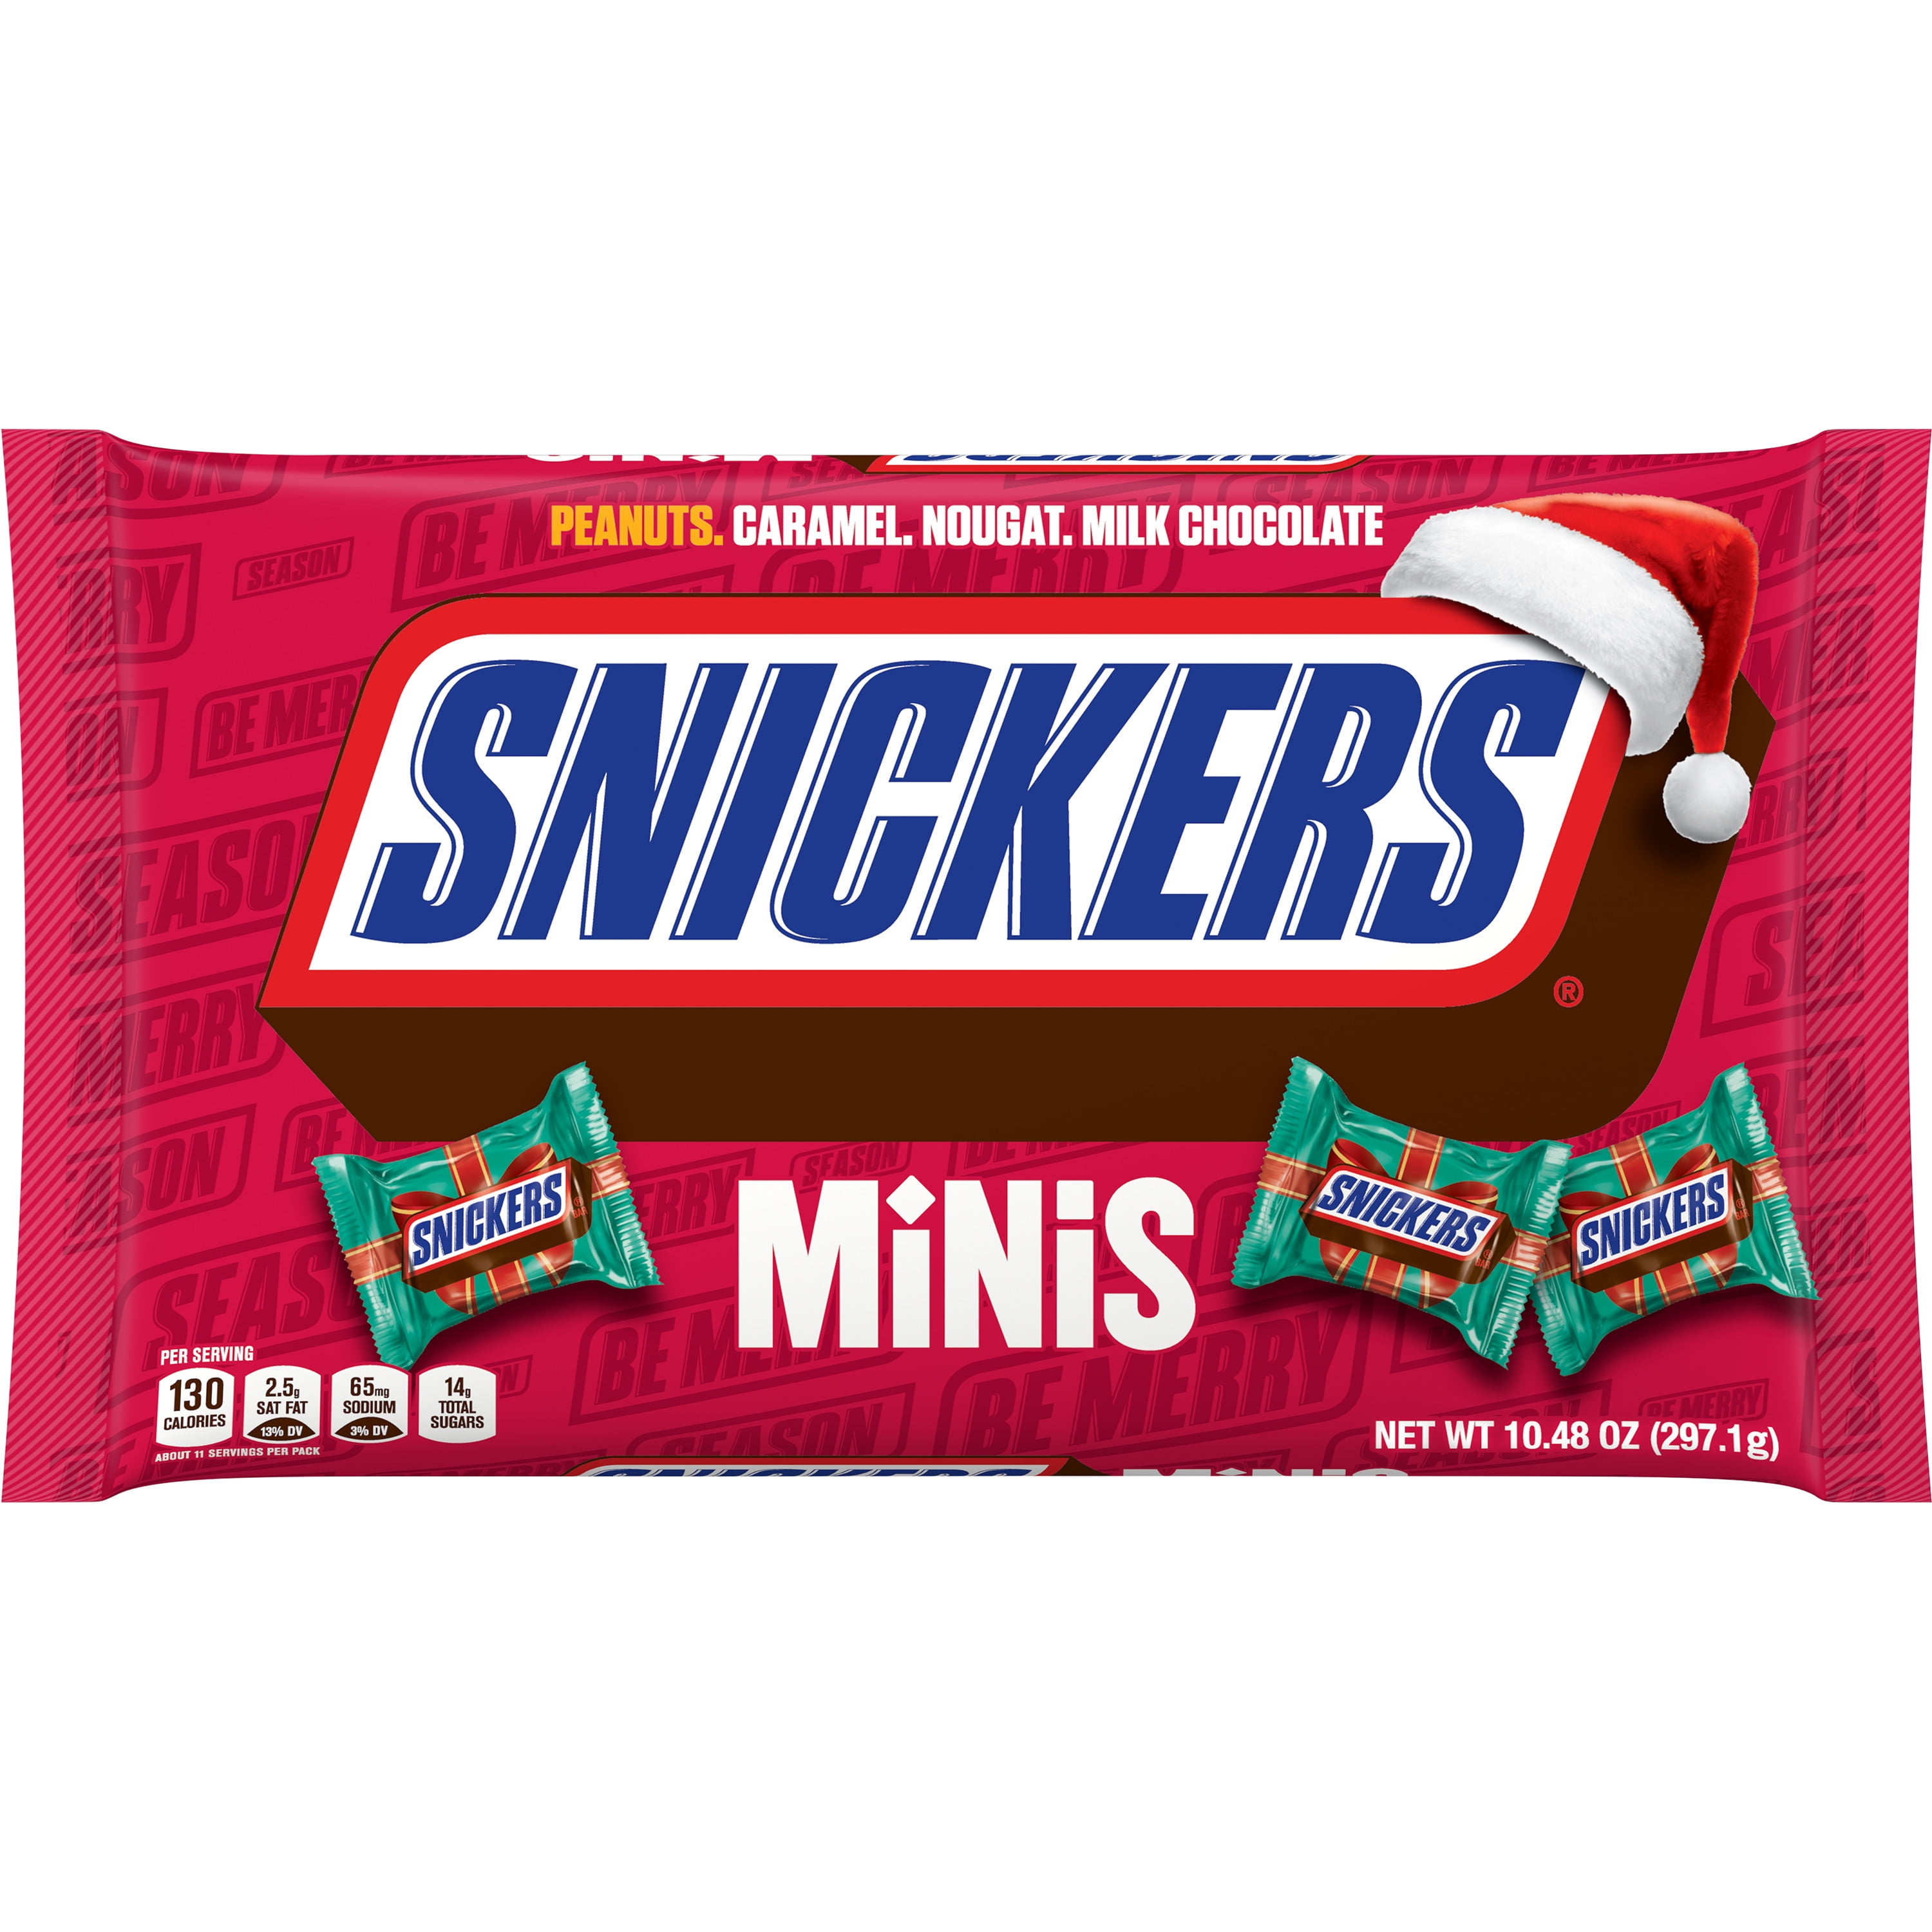 SNICKERS MINIS CHCOLATE CANDY BARS - 8.9oz BAG - PACK OF 3